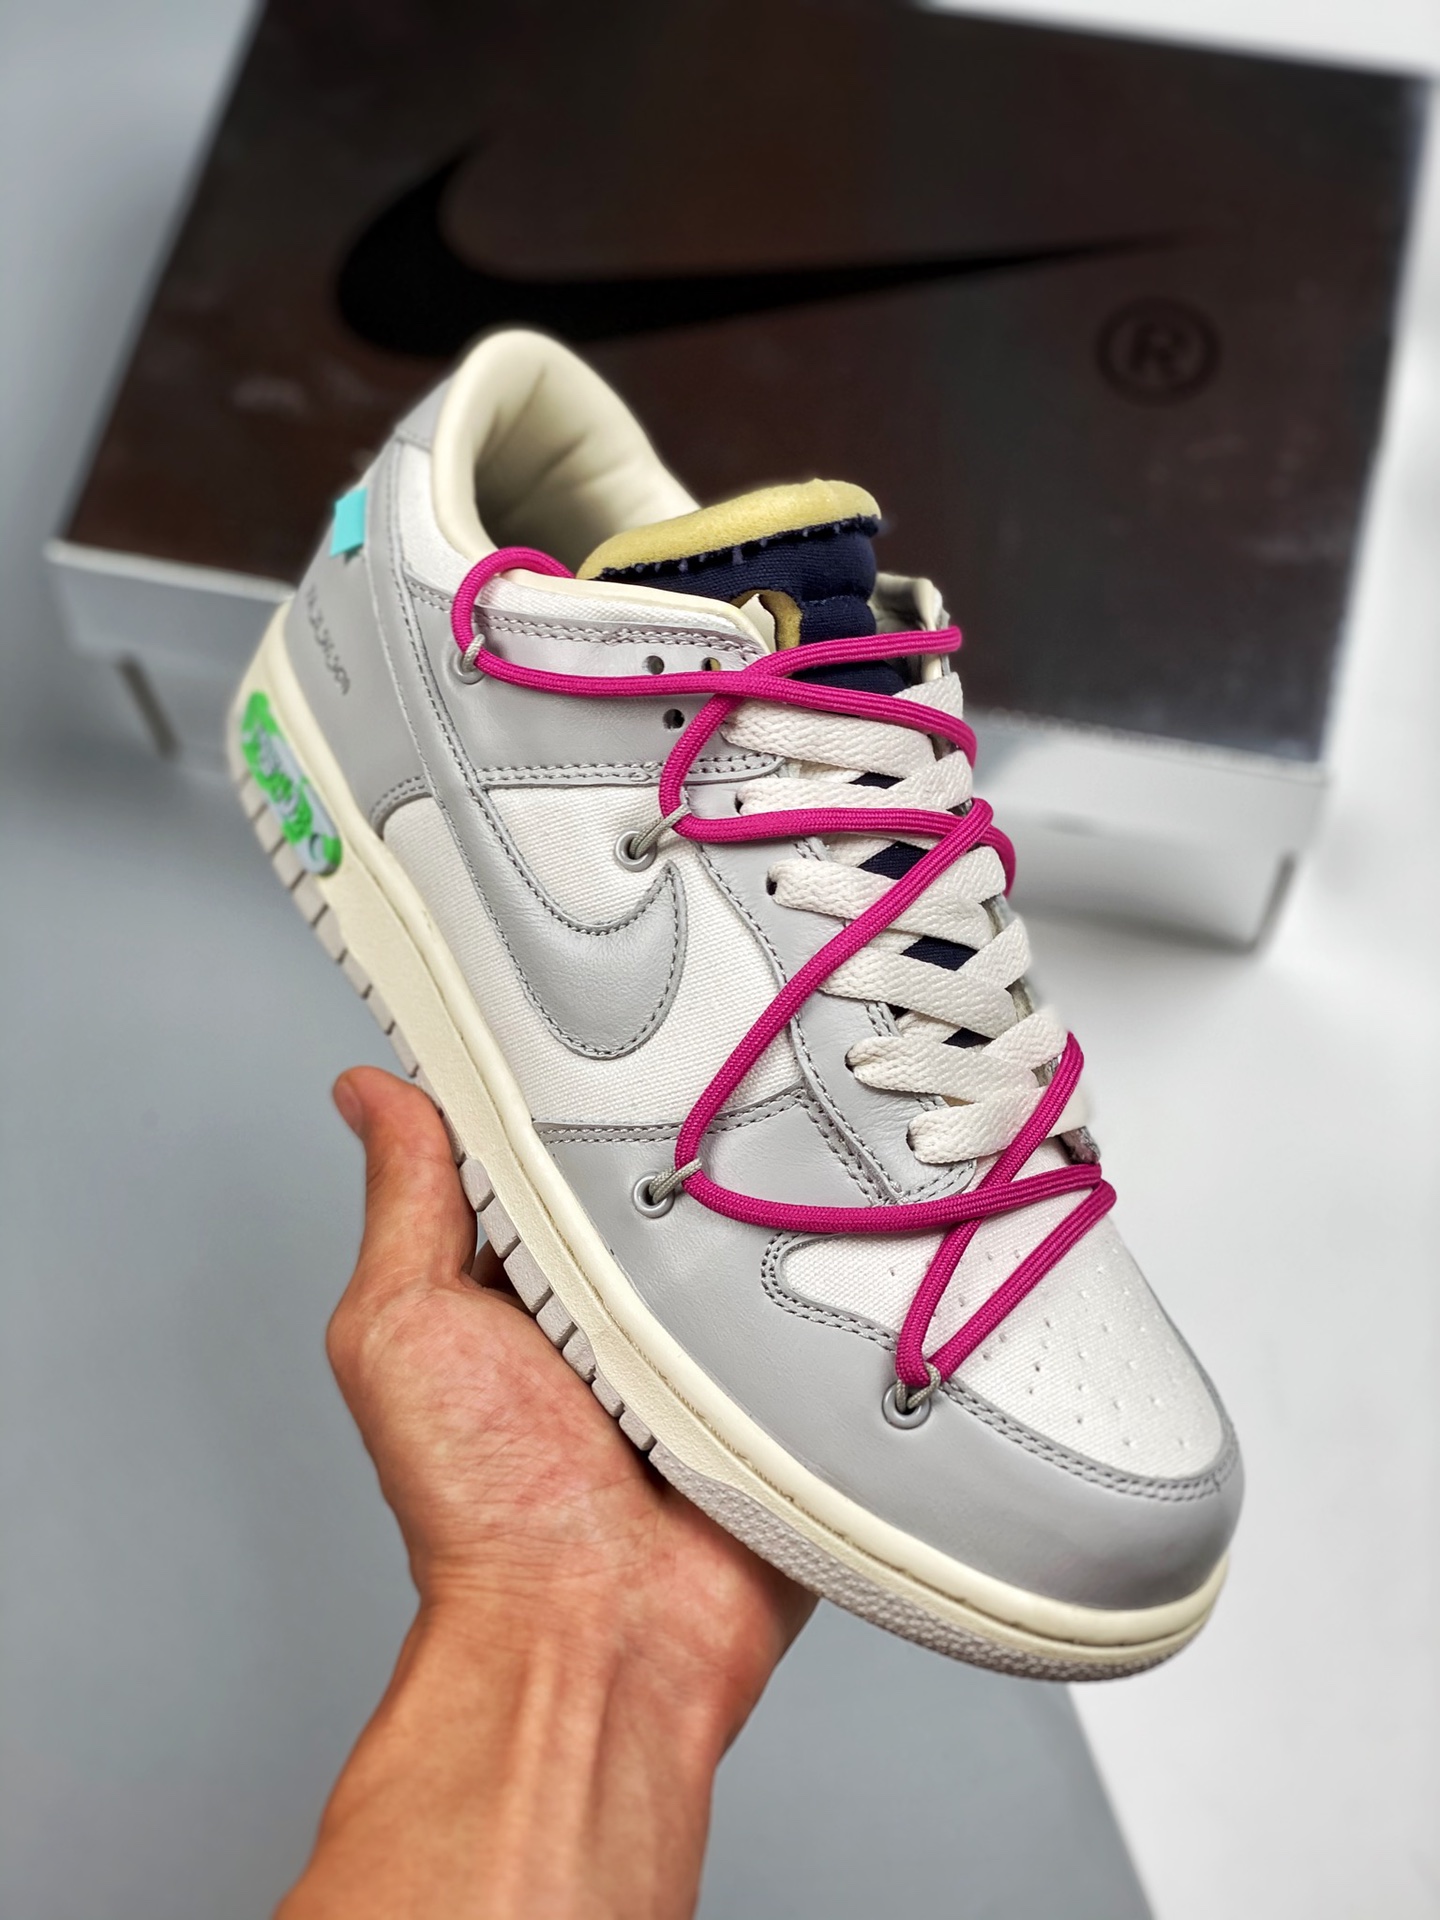 Off-White x Nike Dunk Low "30 of 50" Sail Grey Navy Shoes